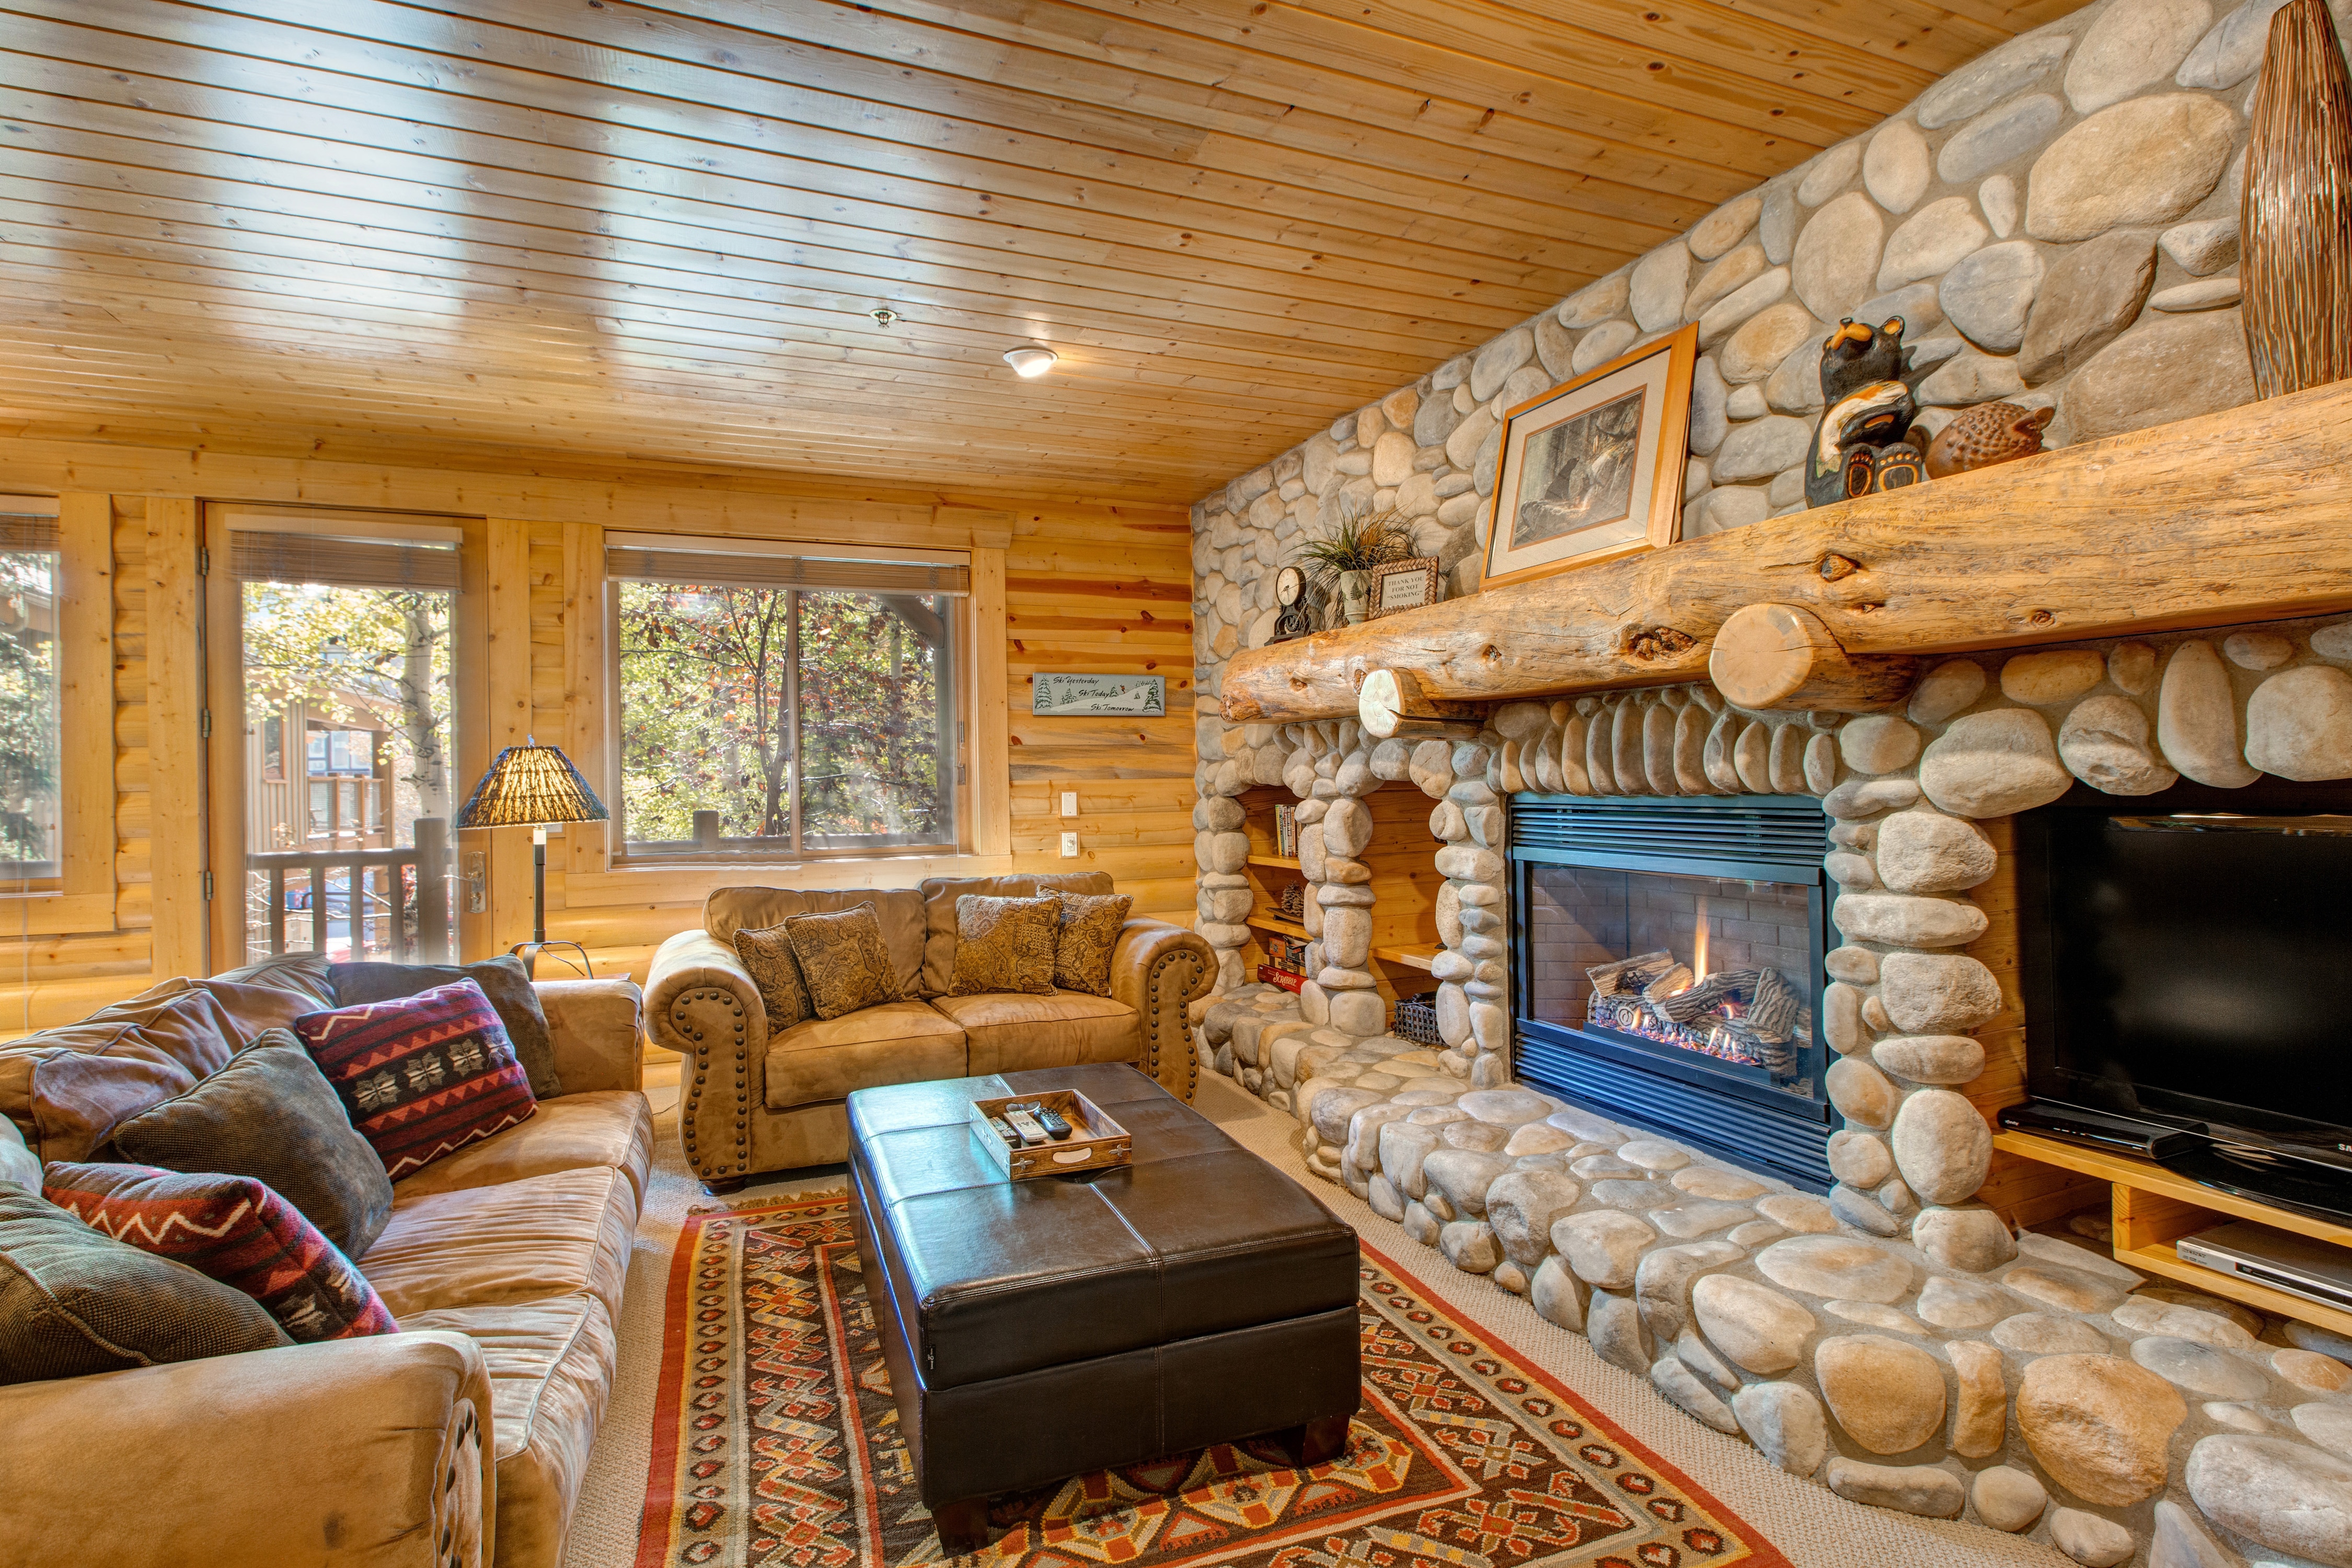 A True Mountain Cabin Feel - Cozy Up by the Gas Fireplace